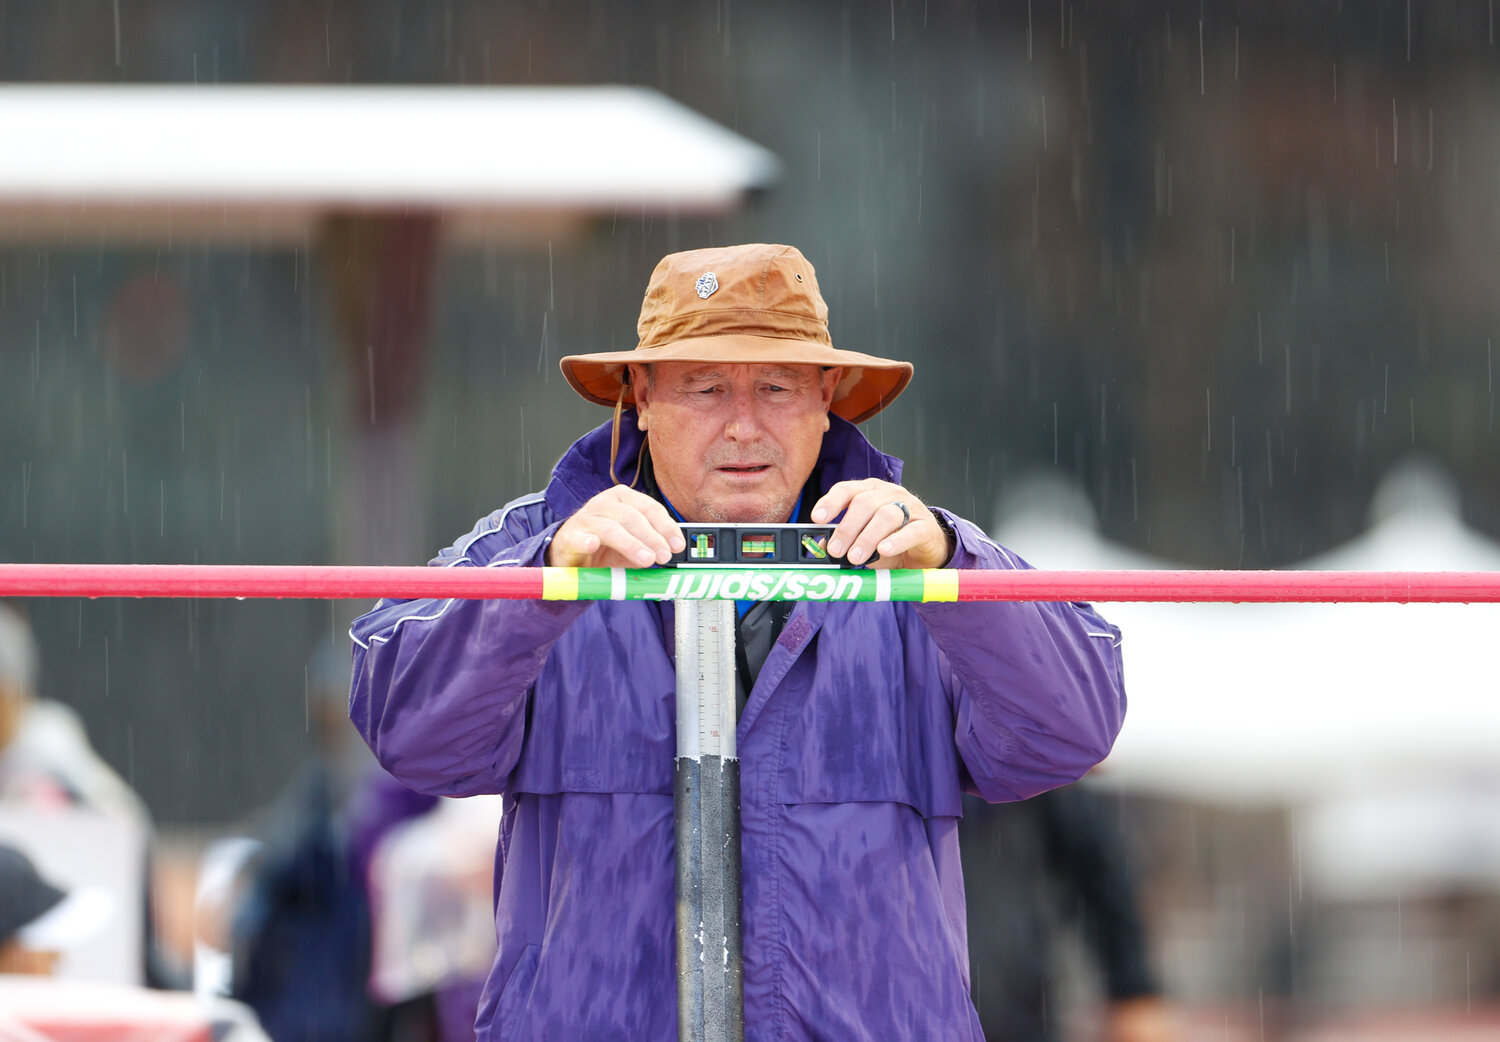 Meet officials prepare the high jump venue at the UIL State Track and Field Meet on a rainy Saturday morning, May 13, 2023 in Austin.